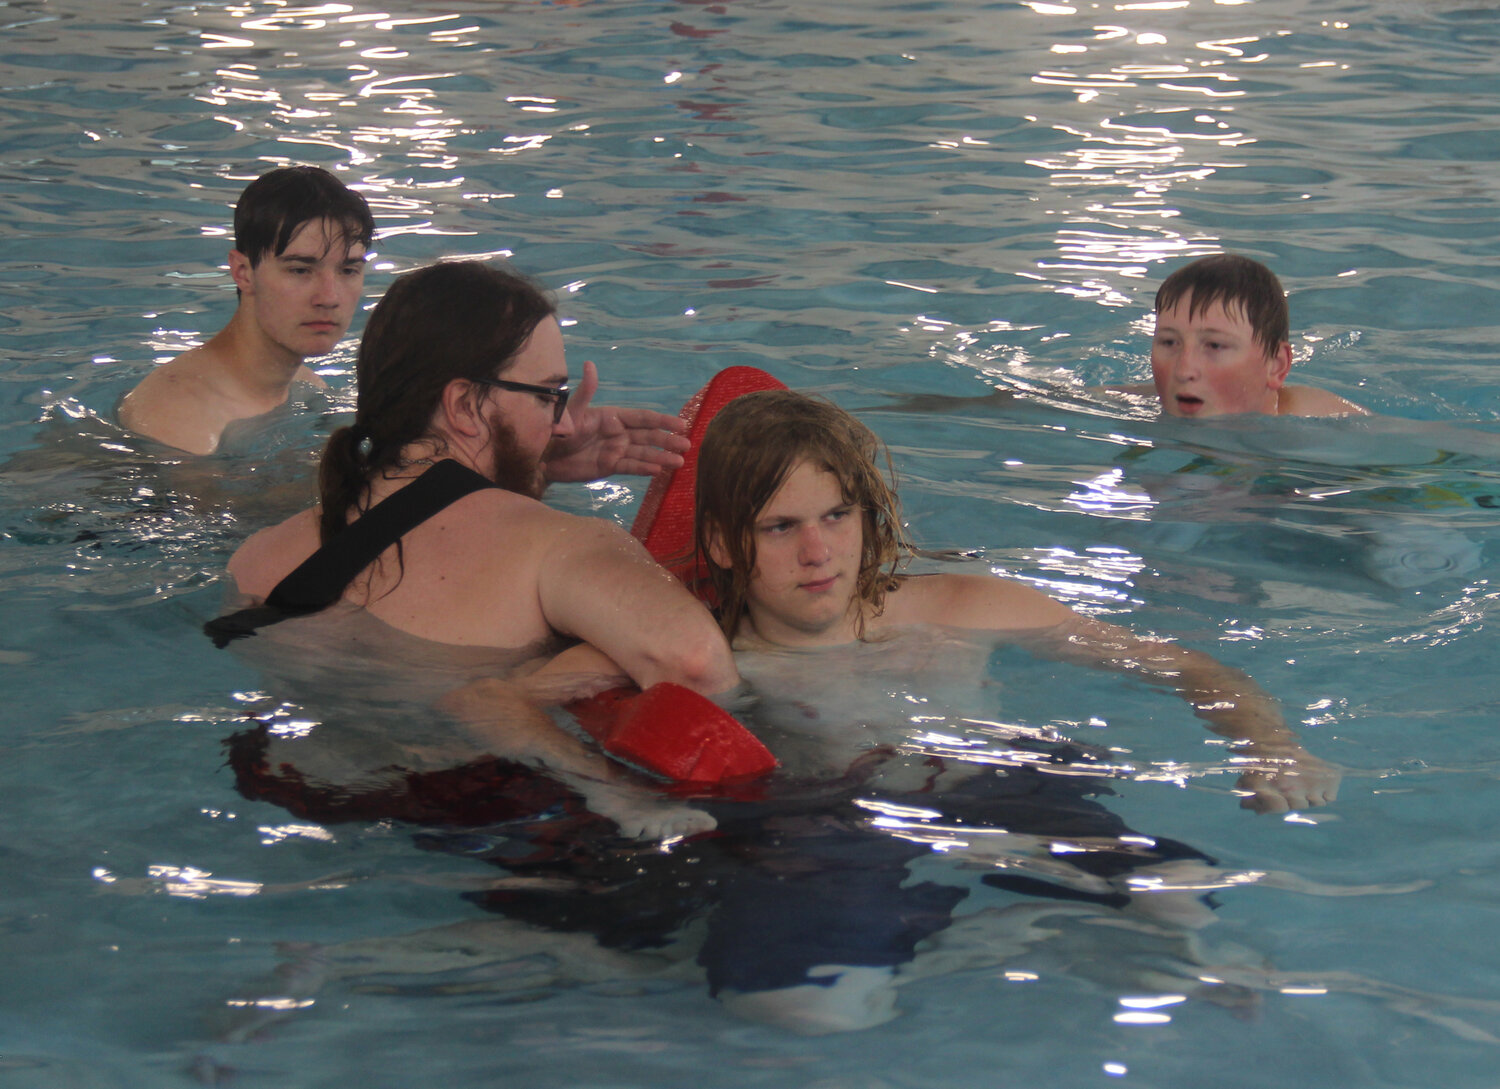 Cole McBride demonstrates the technique for a water rescue on Hudson Grube while Jacob Nagel and Cooper Stone watch.